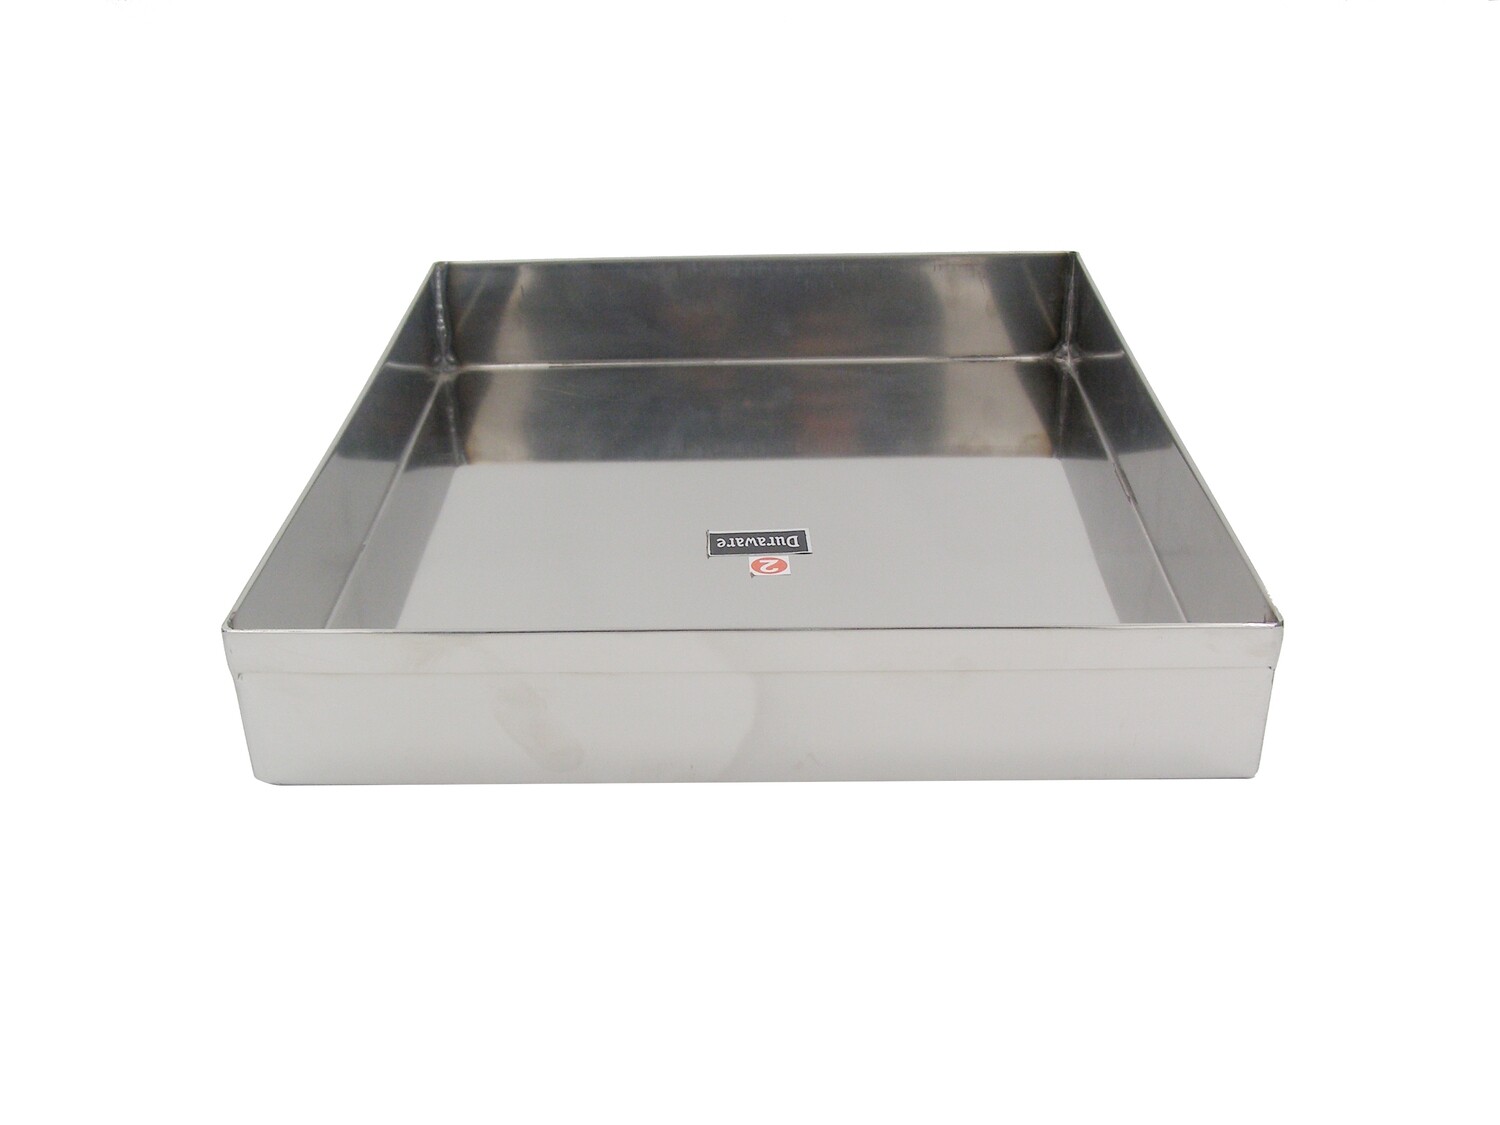 WELCOME/DURAWARE SS 30X36CM SWEET TRAY NO-2